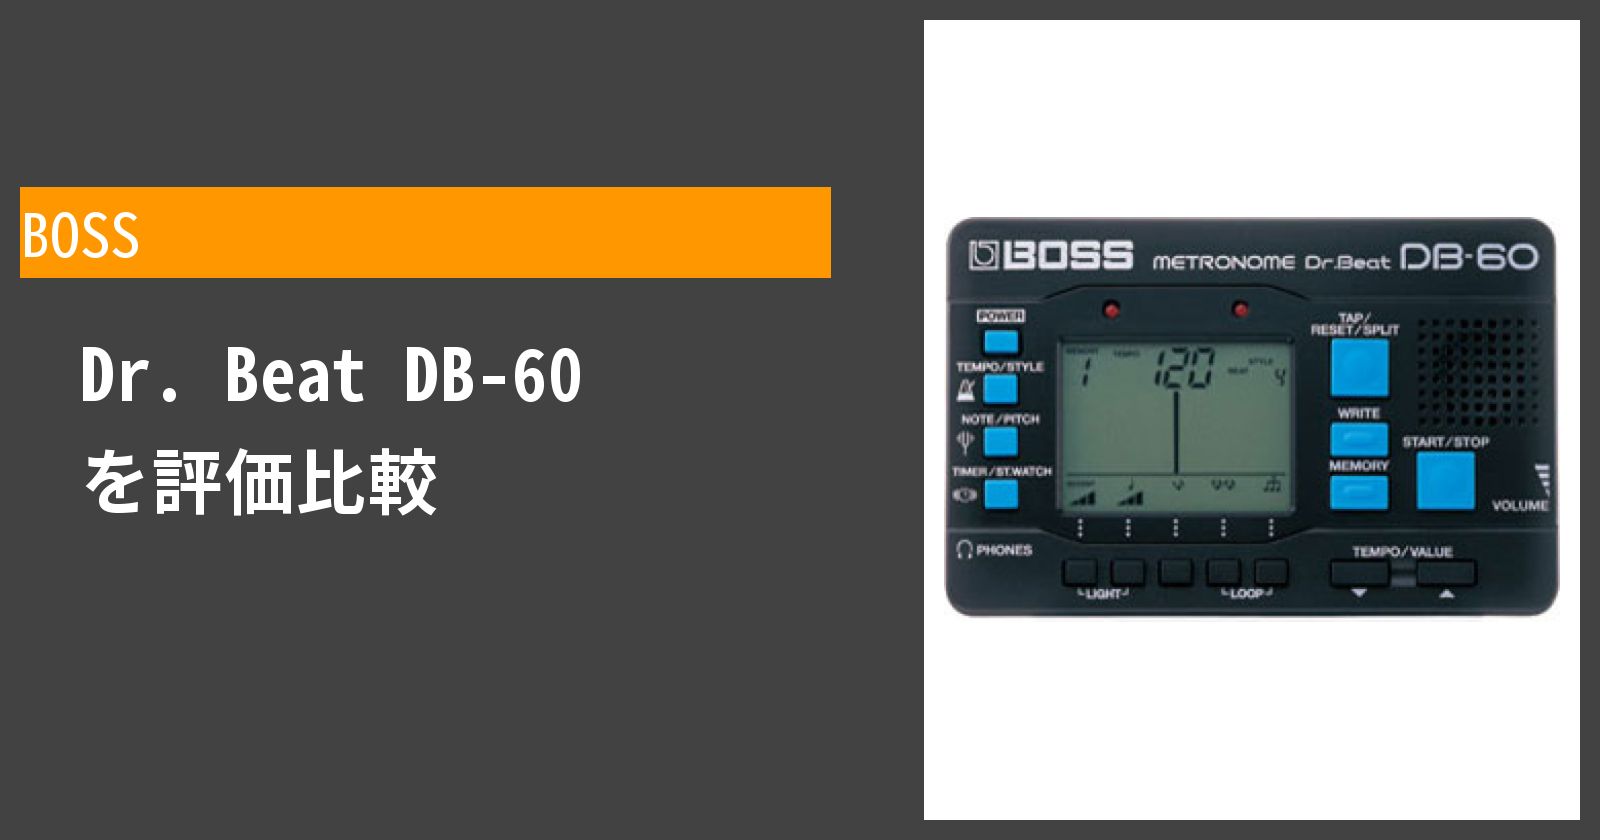 Dr. Beat DB-60を徹底評価